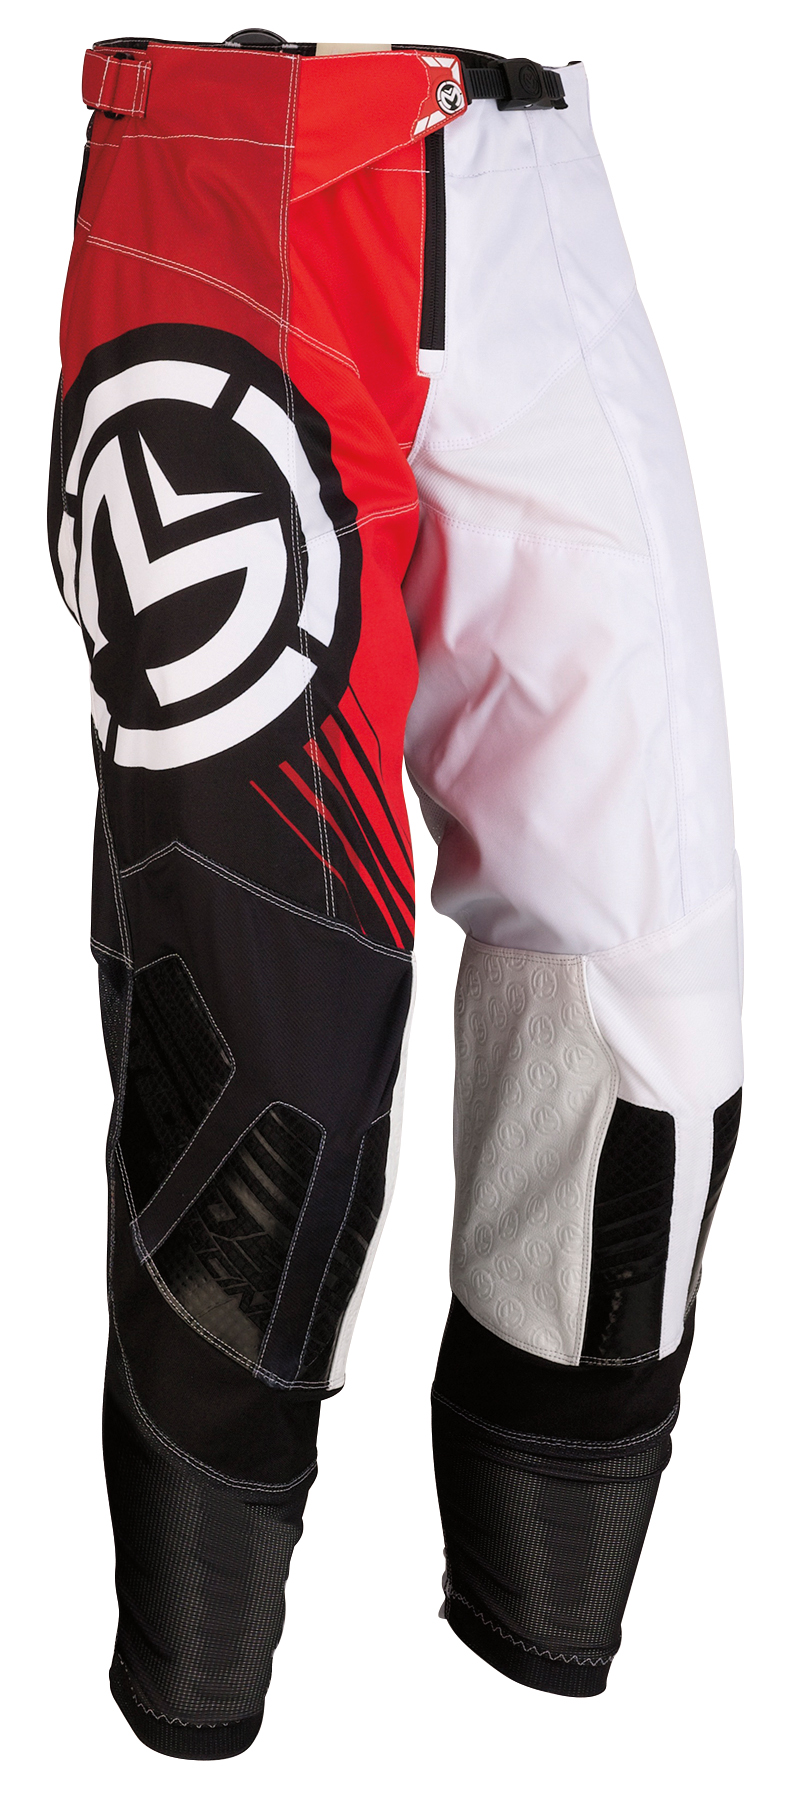 Viewing Images For Moose Racing 2020 M1 Pants :: MotorcycleGear.com